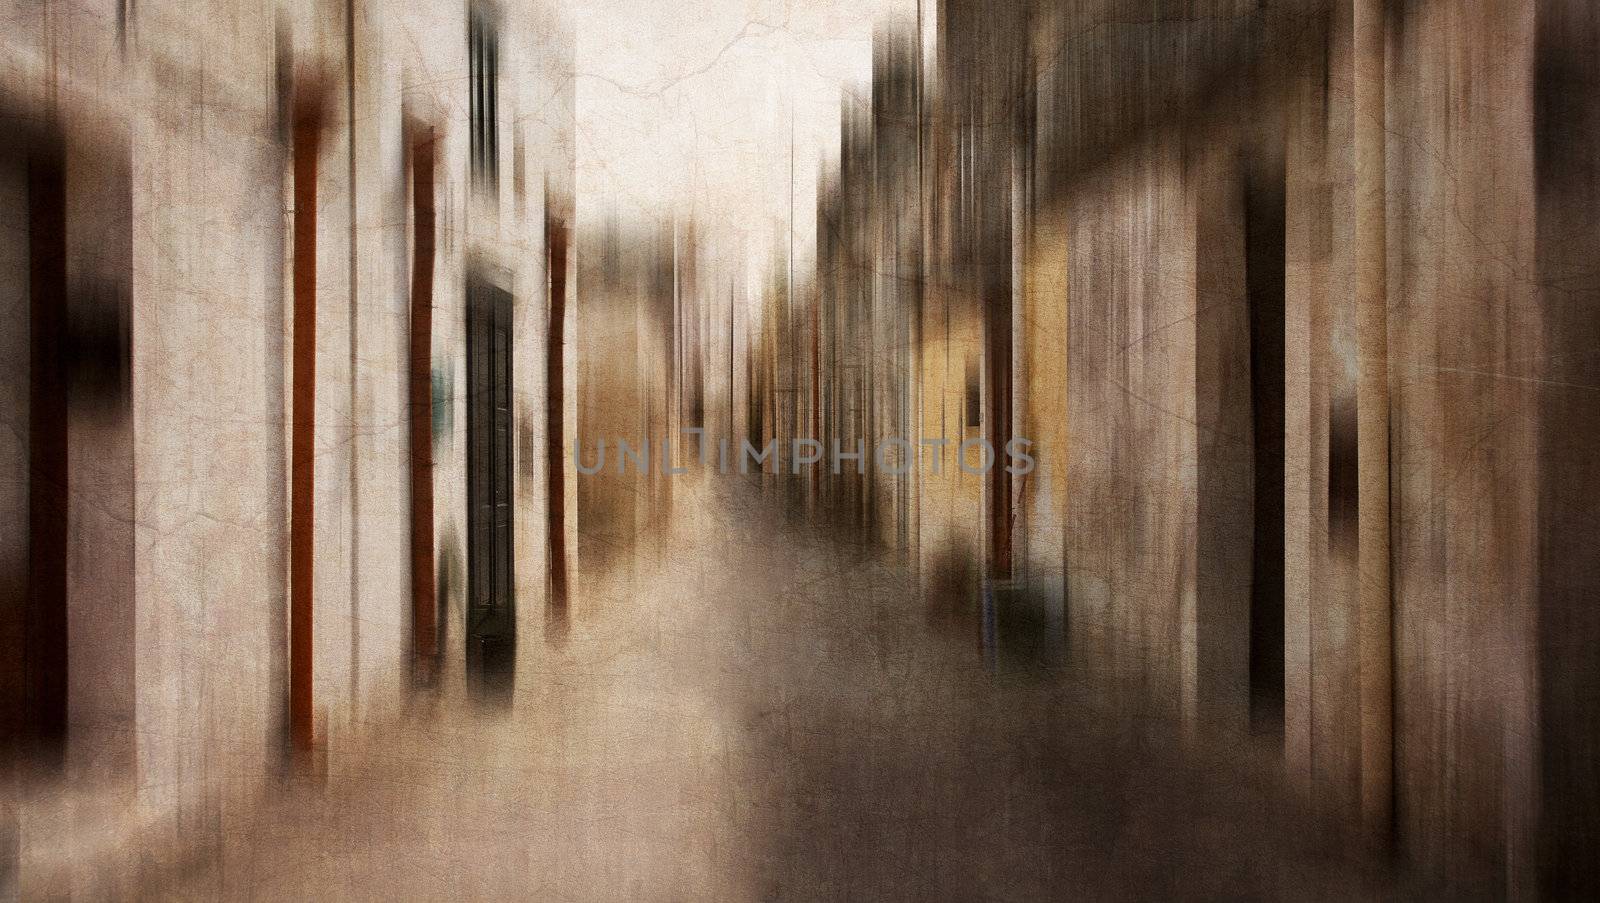 Dreaming back to the Italian village where I spent my vacation. Intentional motion blur. 